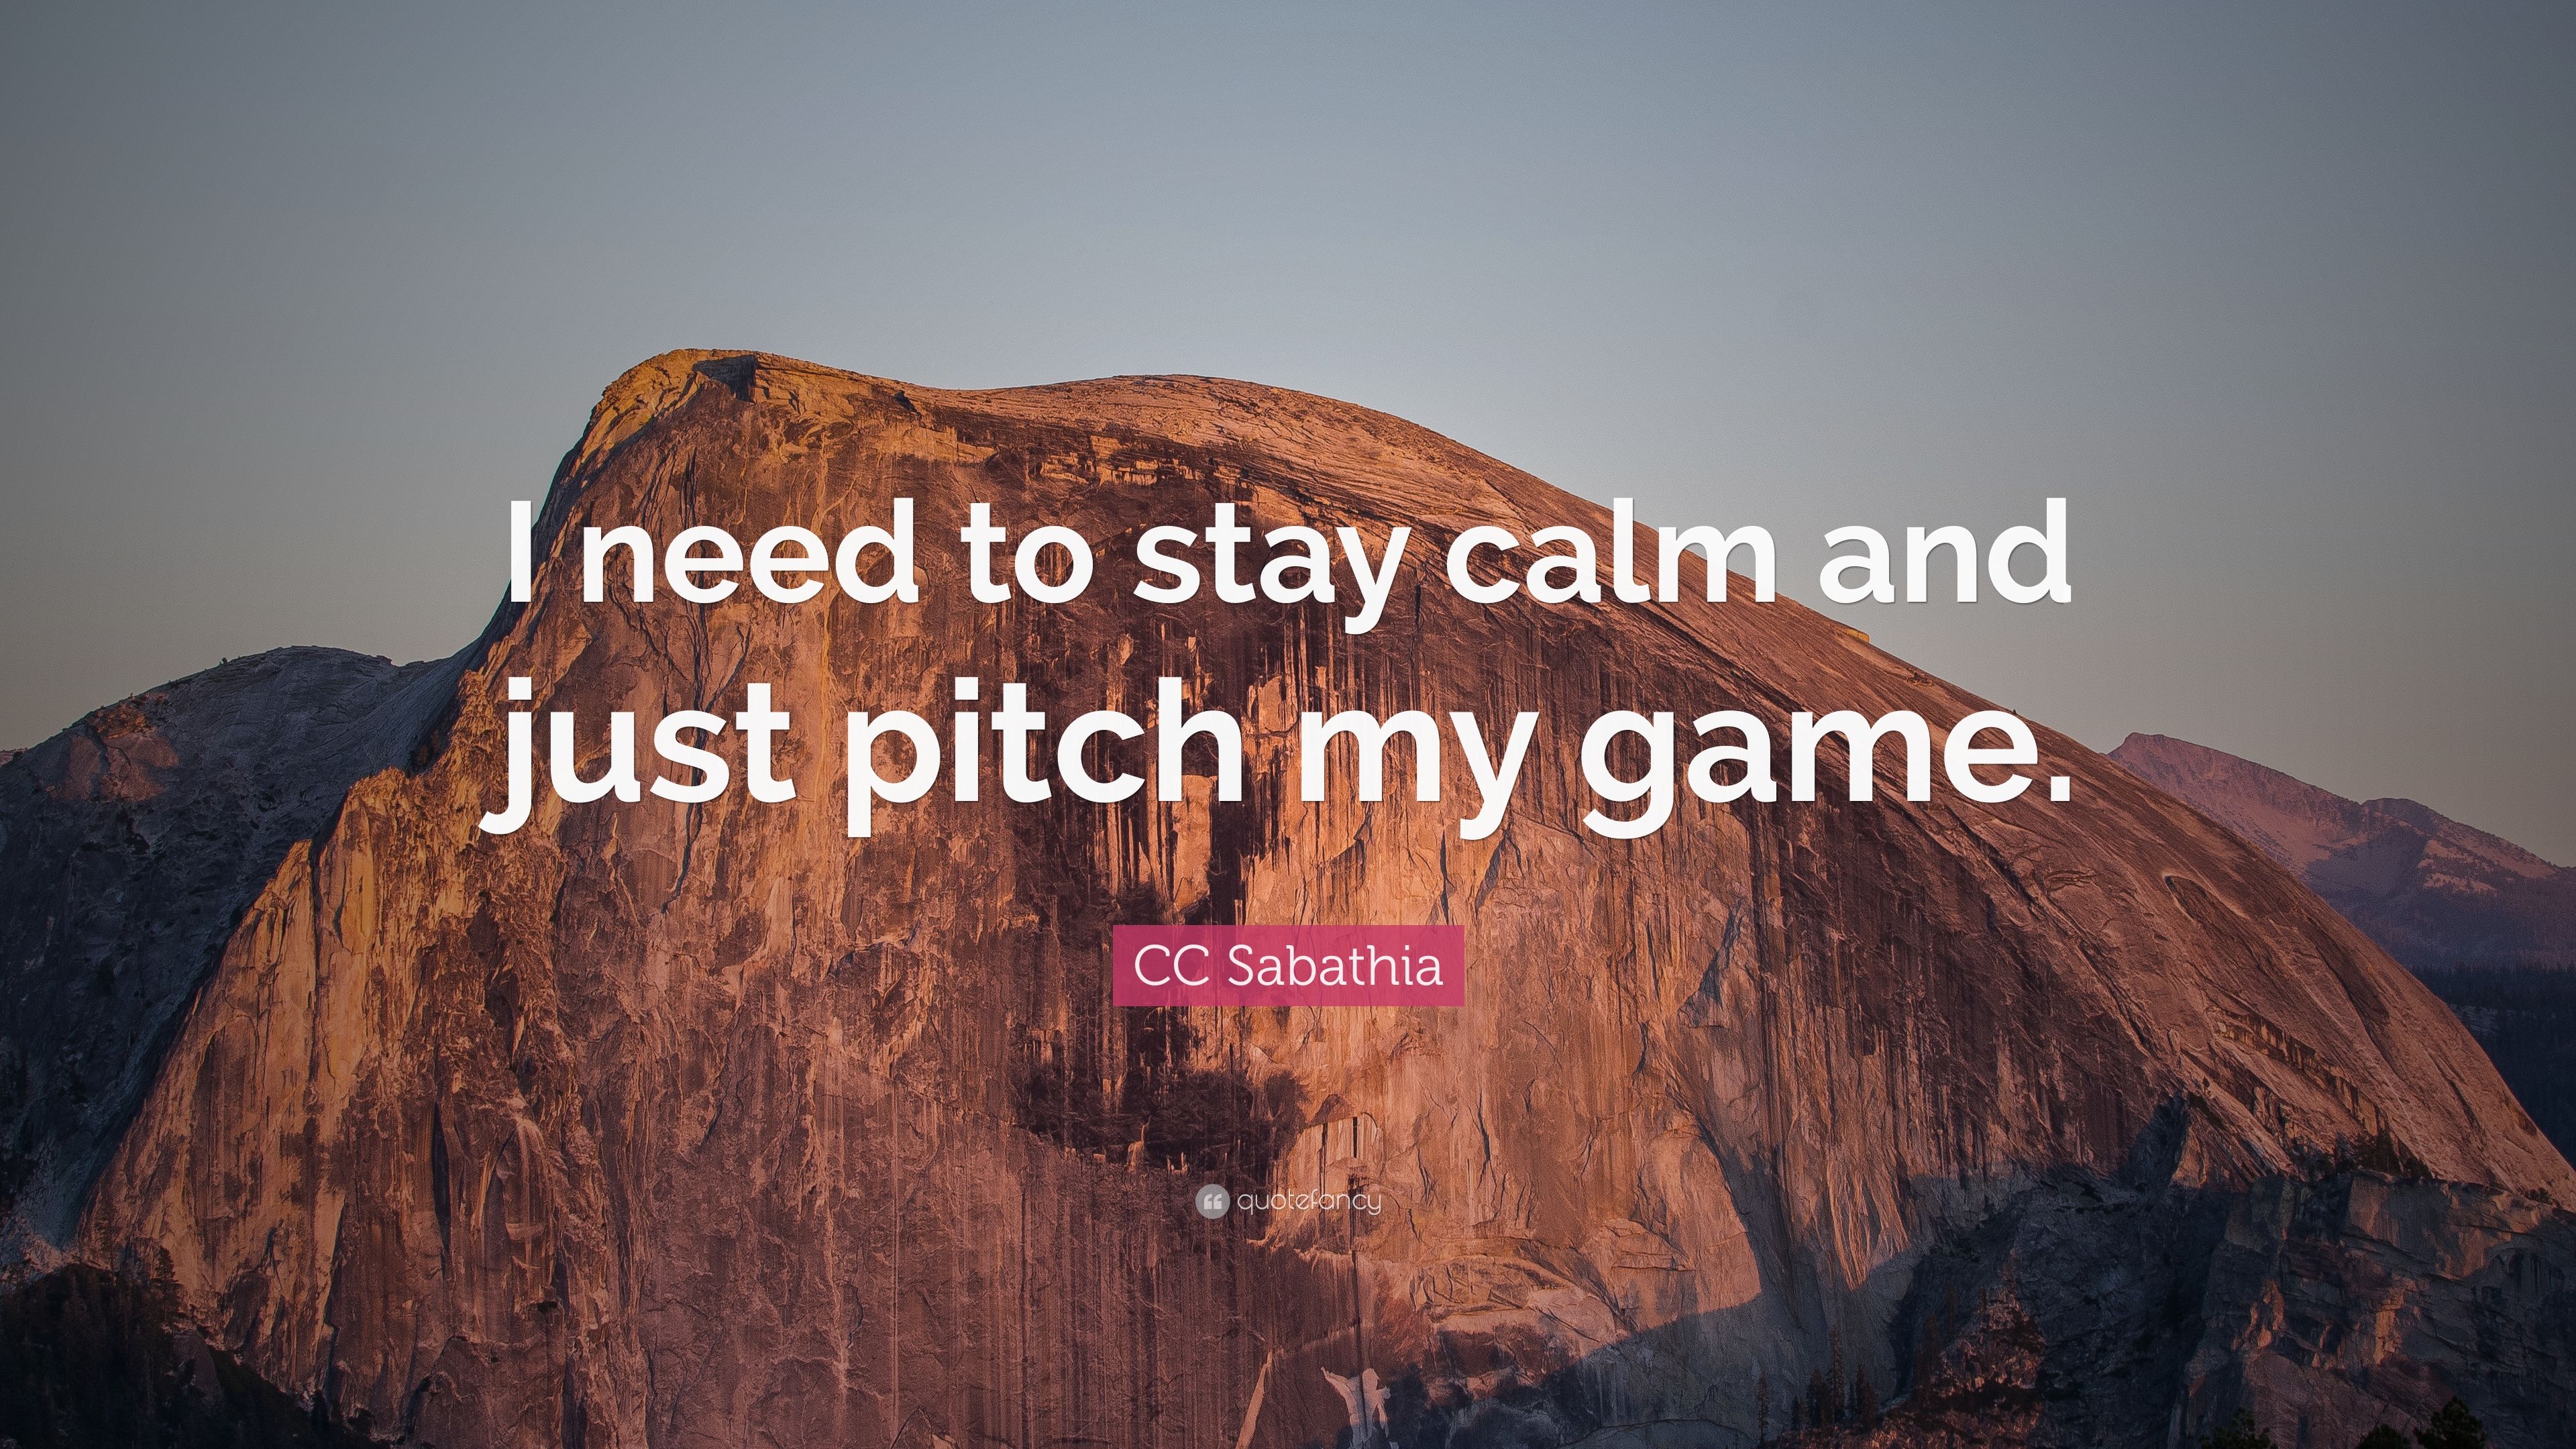 CC Sabathia Quote: “I need to stay calm and just pitch my game